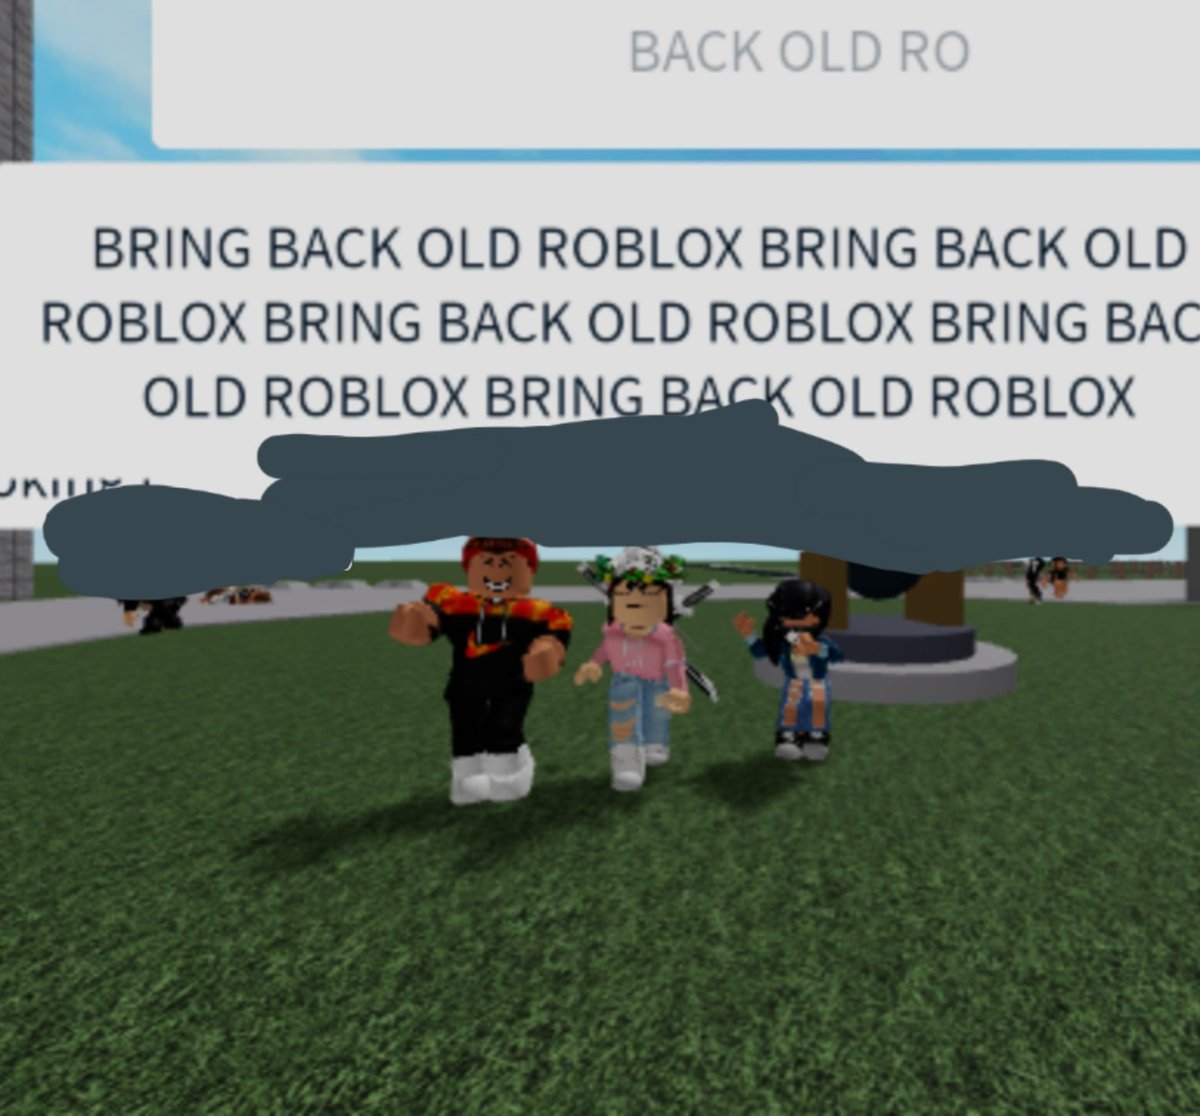 M On Twitter Theres These Protesting Things Going On In Roblox For Bringing Back Old Roblox Because Of The Toxicity Of The Community According To At Least Two People I Asked It S - ragdoll button roblox game